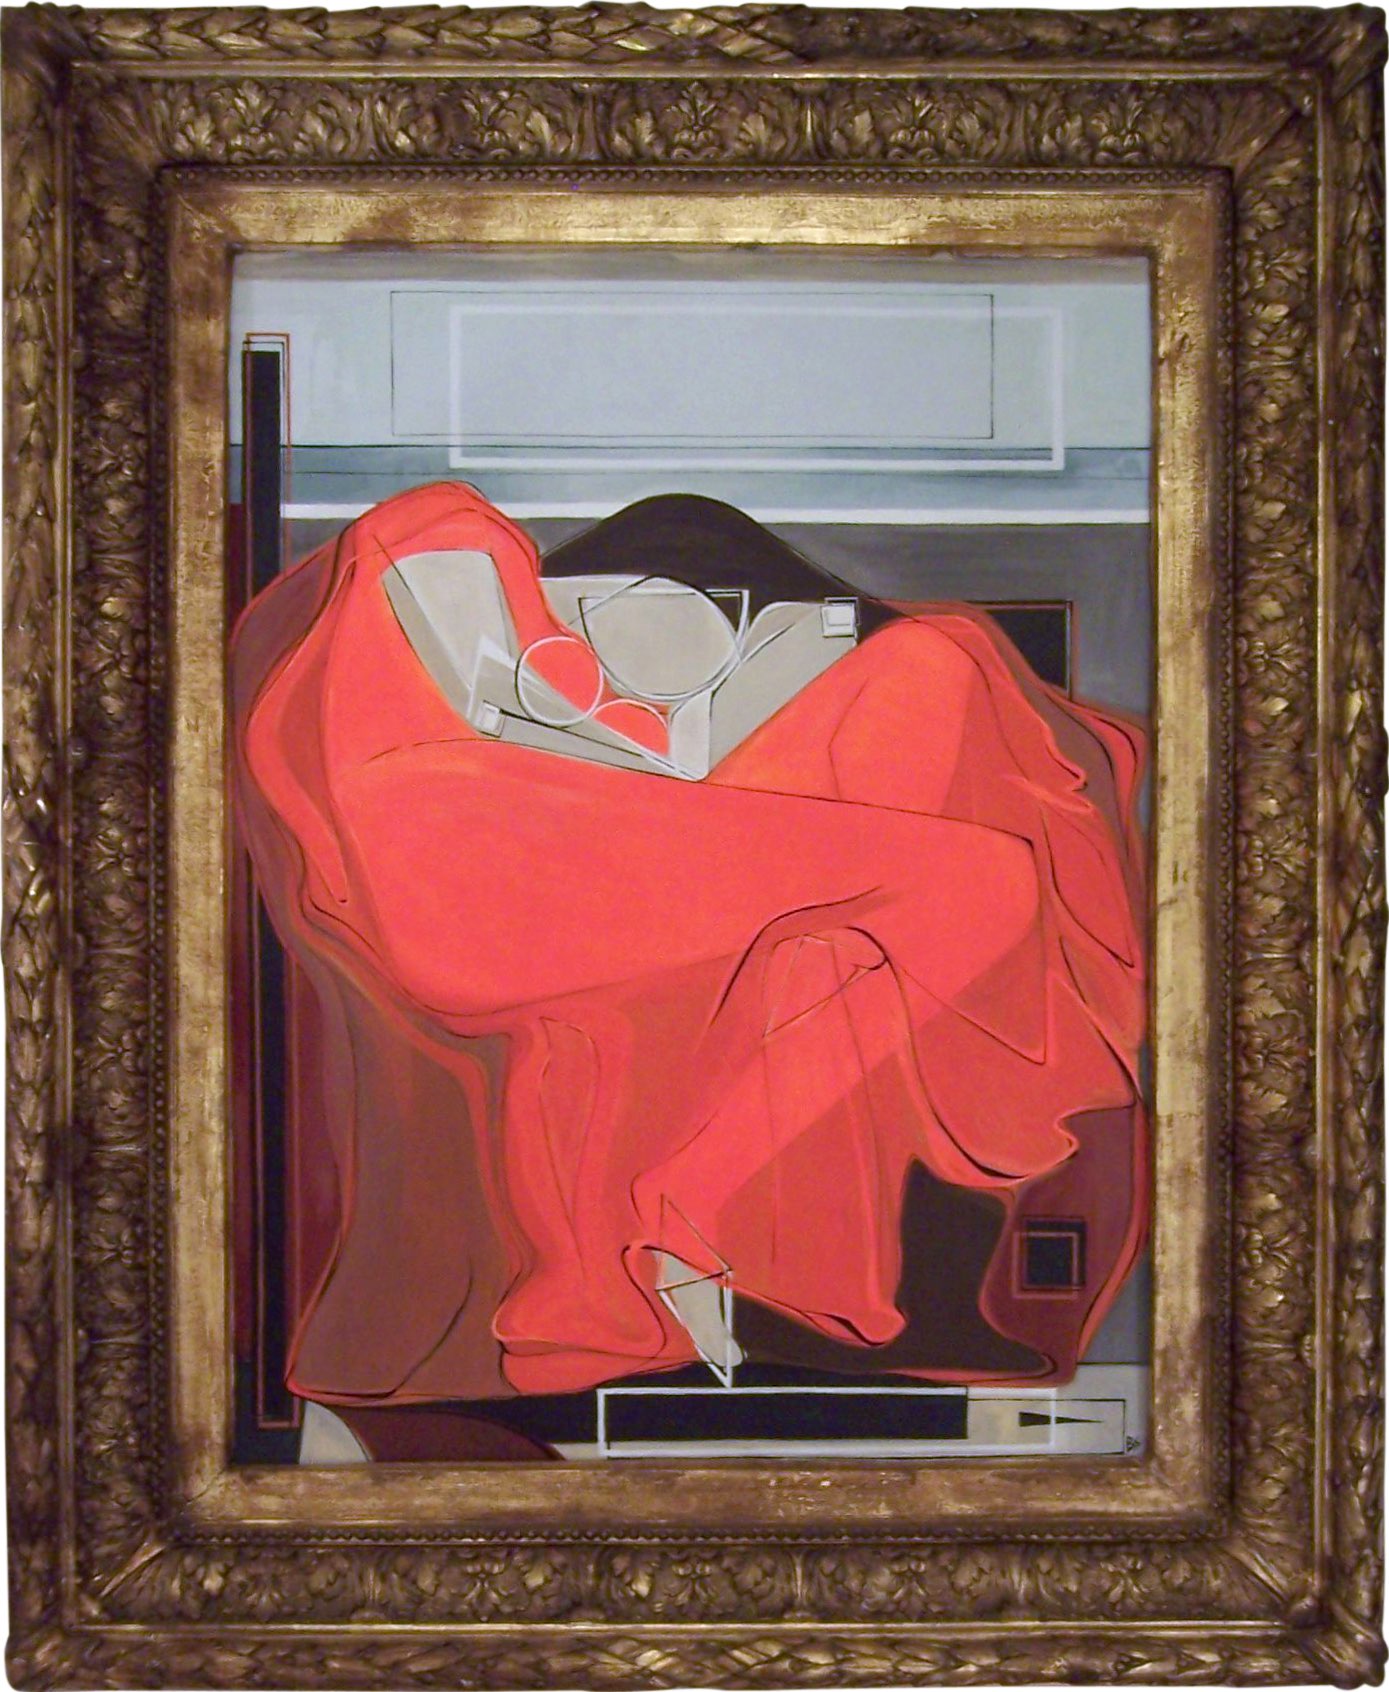 'Flaming June' - Homage to Frederick Lord Leighton Oil & Acrylic on Board in Victorian Ornate Foliate Frame